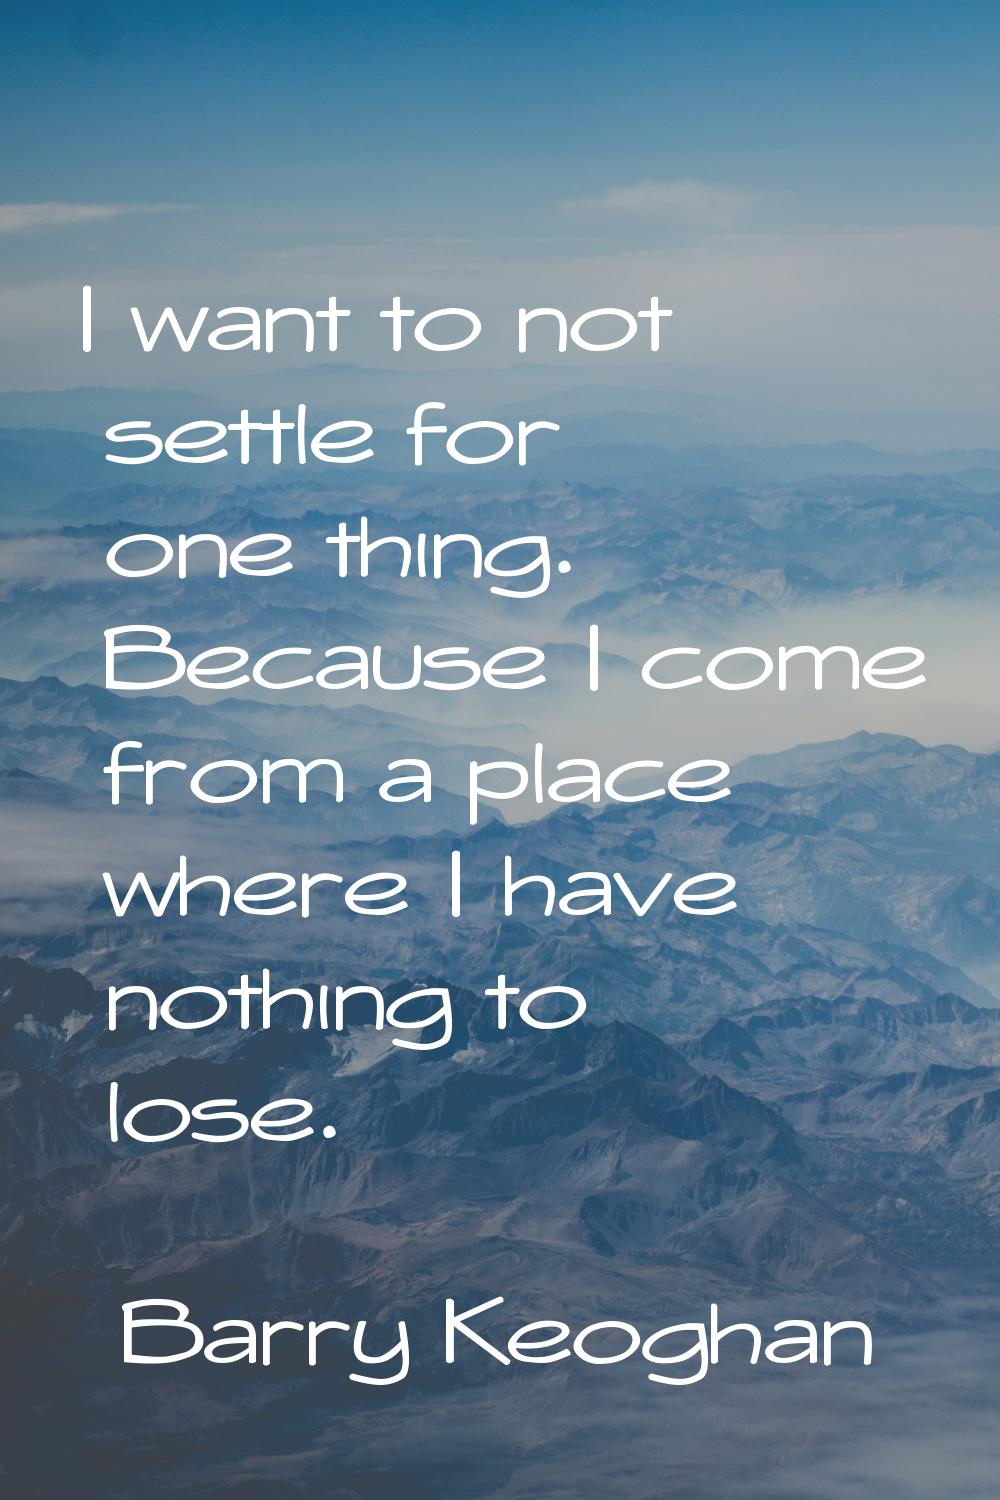 I want to not settle for one thing. Because I come from a place where I have nothing to lose.